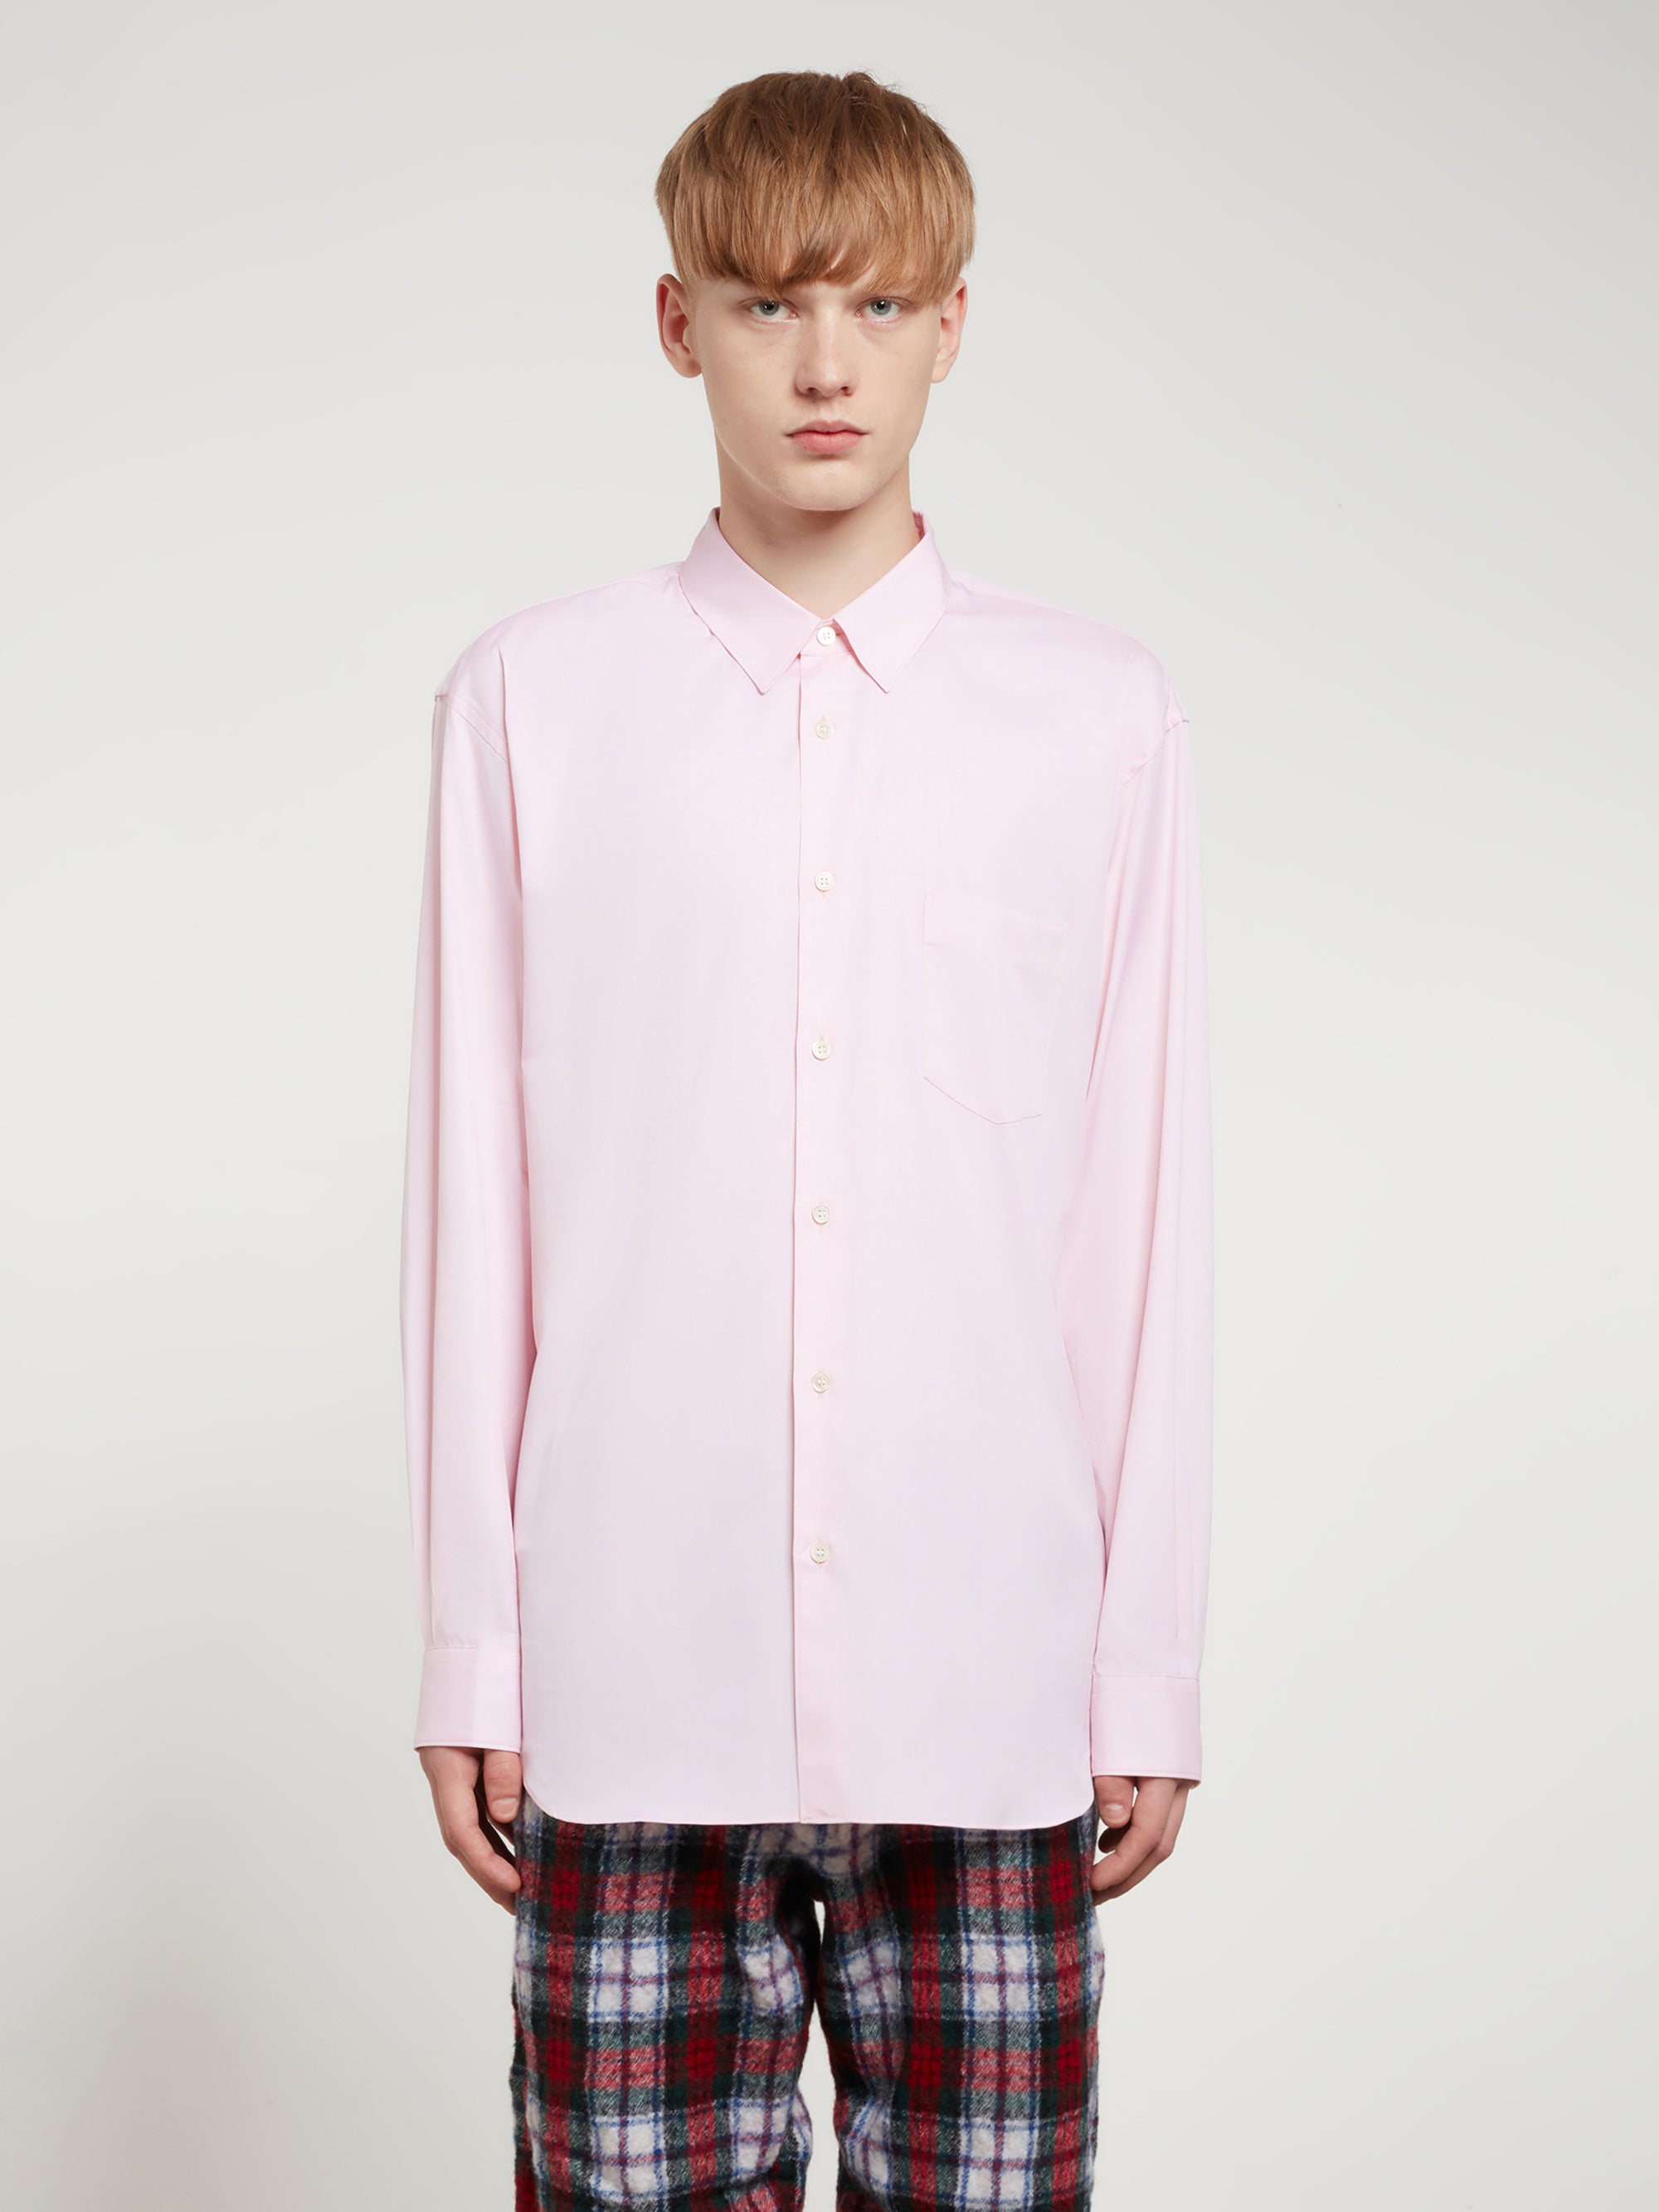 CDG Shirt Forever - Classic Fit Woven Cotton Shirt - (Pink) view 2